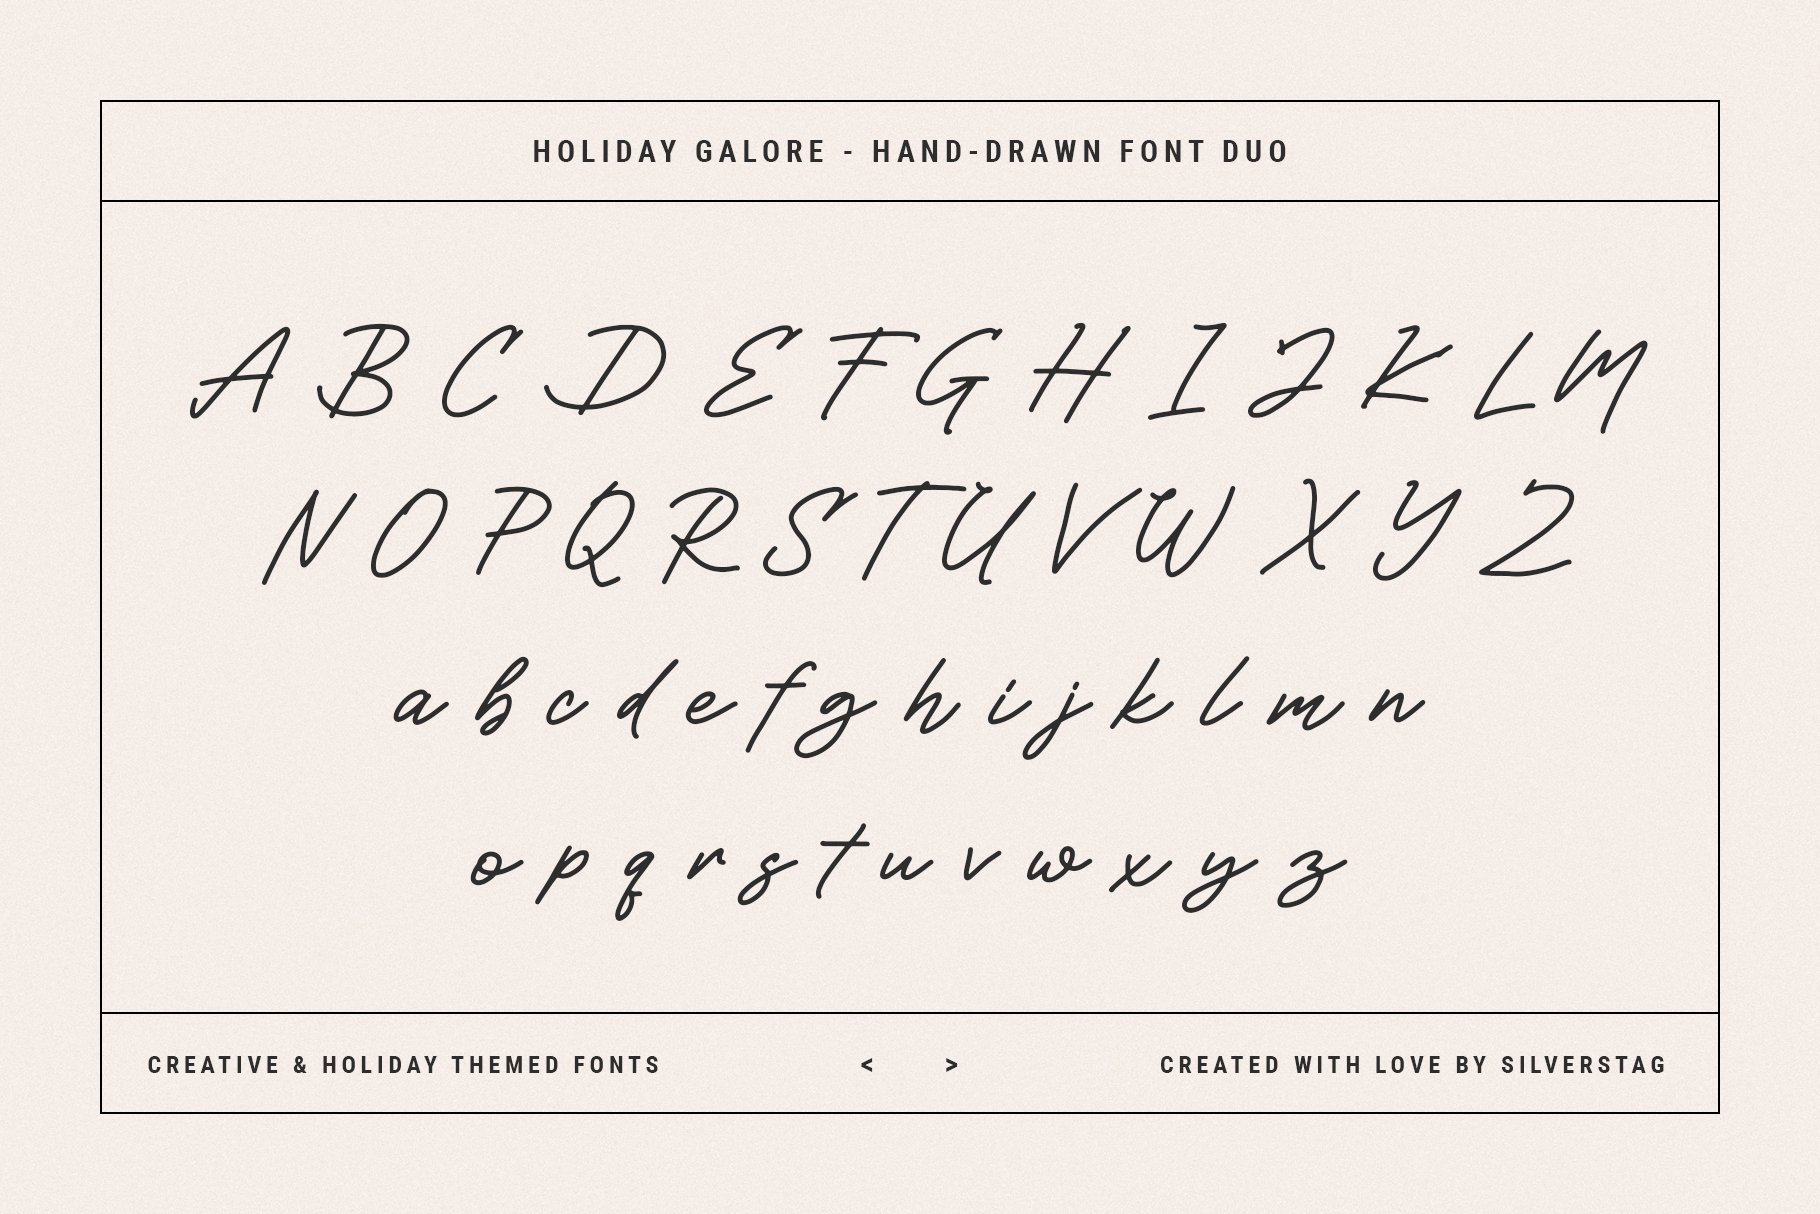 34 holiday galore font duo by silver stag 124